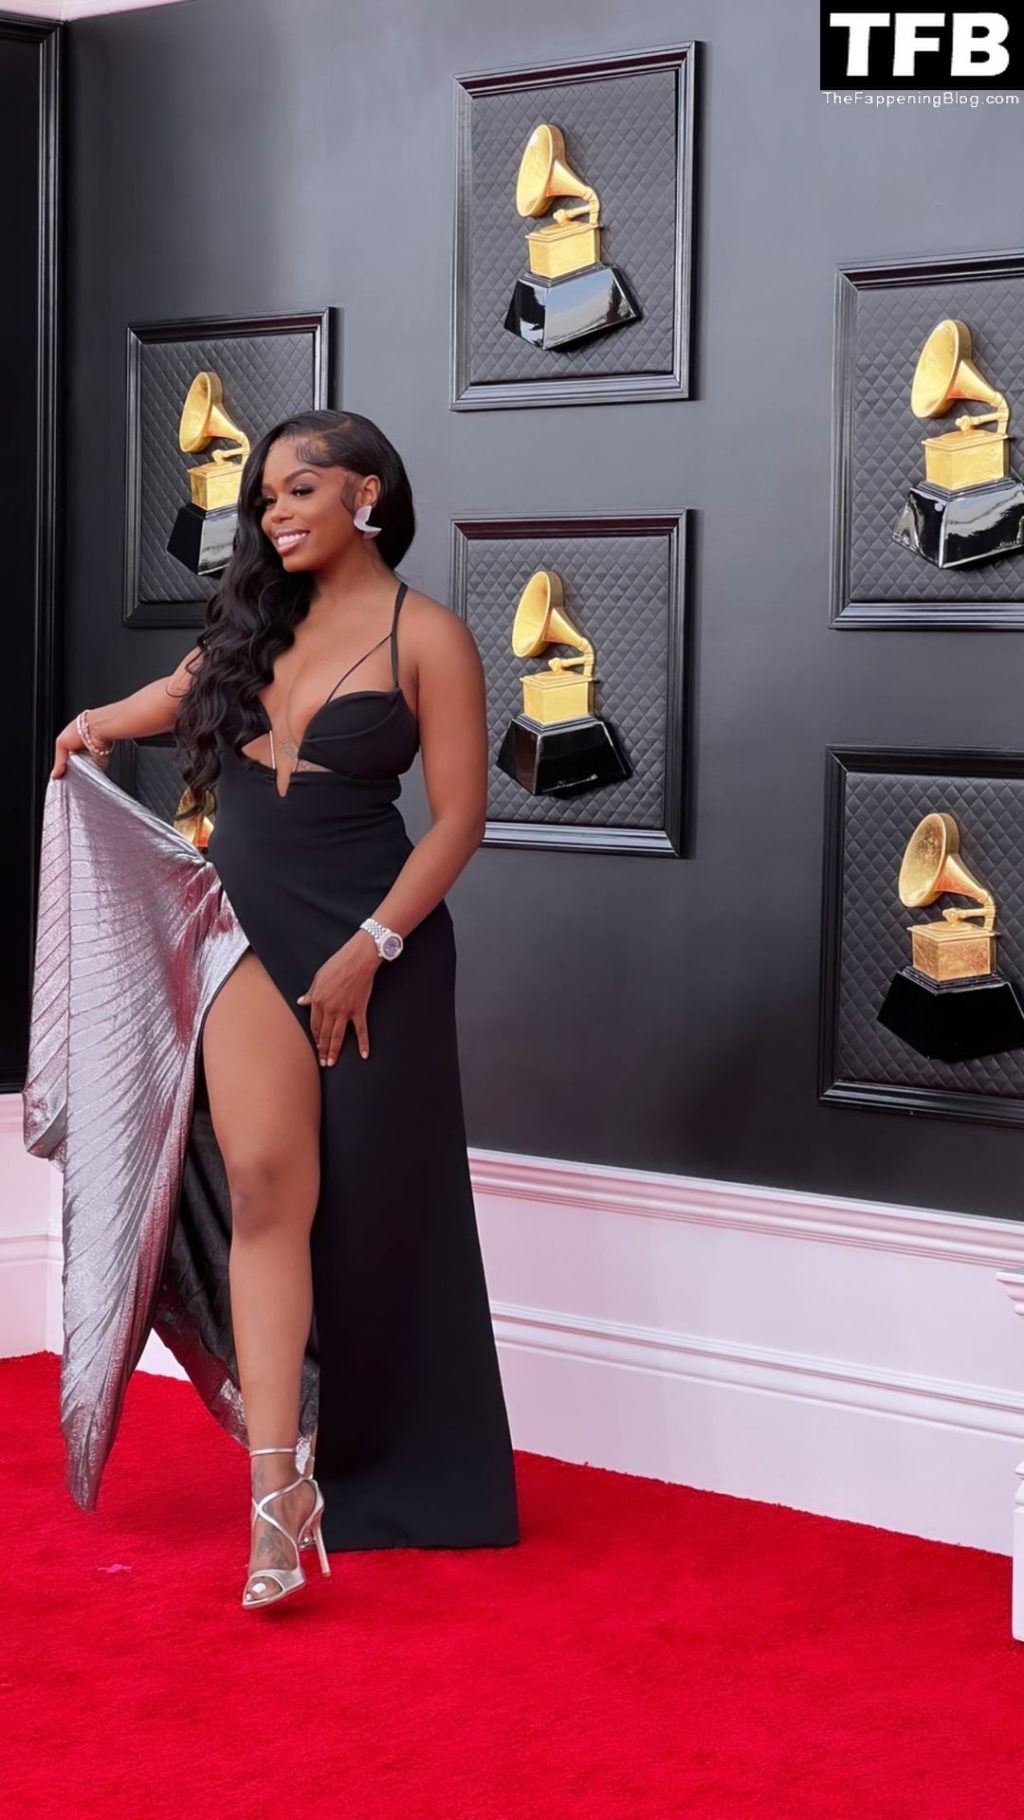 Dreezy Flaunts Her Curves in a Black Dress at the 64th Annual Grammy Awards (2 Photos)